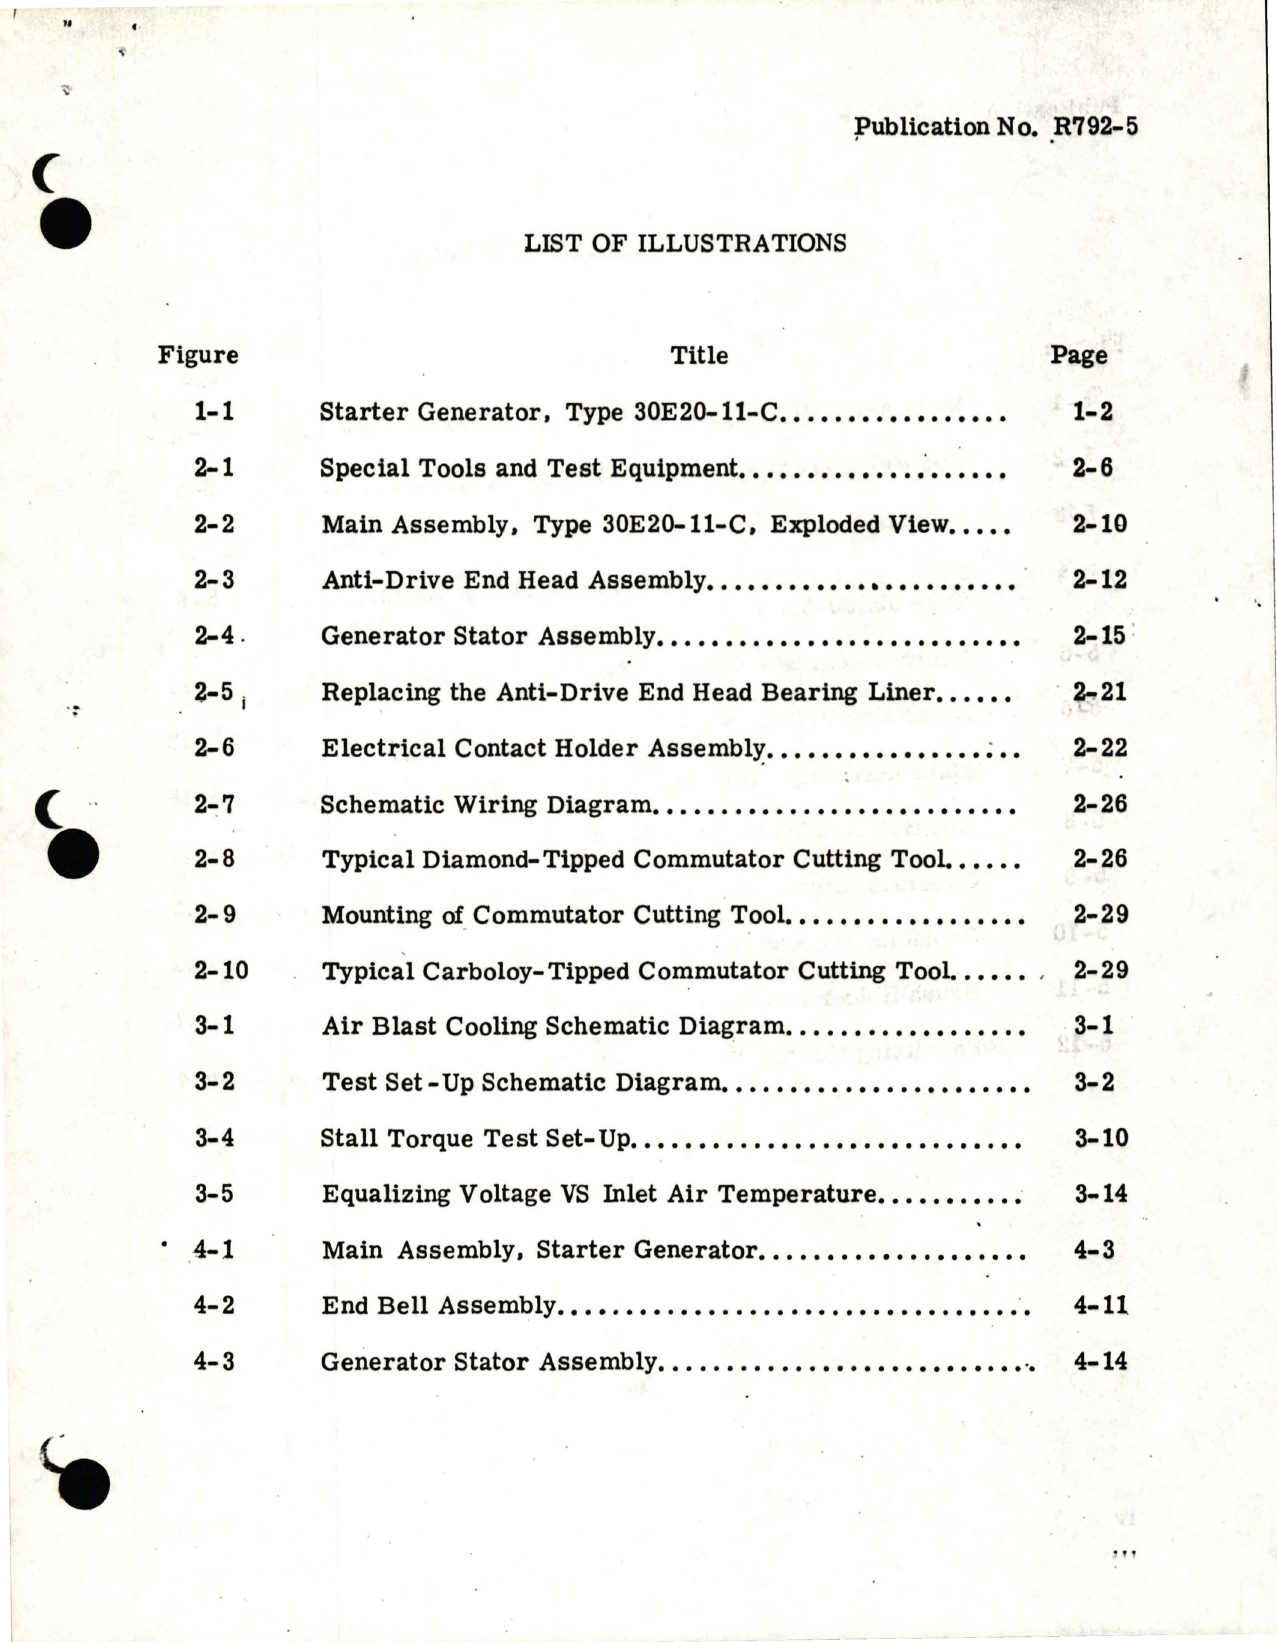 Sample page 5 from AirCorps Library document: Maintenance Instructions with Illustrated Parts List for Starter Generator - Types 30E20-11-C, 30E20-39-A, 30E20-41-B, 30E20-49-B, and 30E20-97-A 